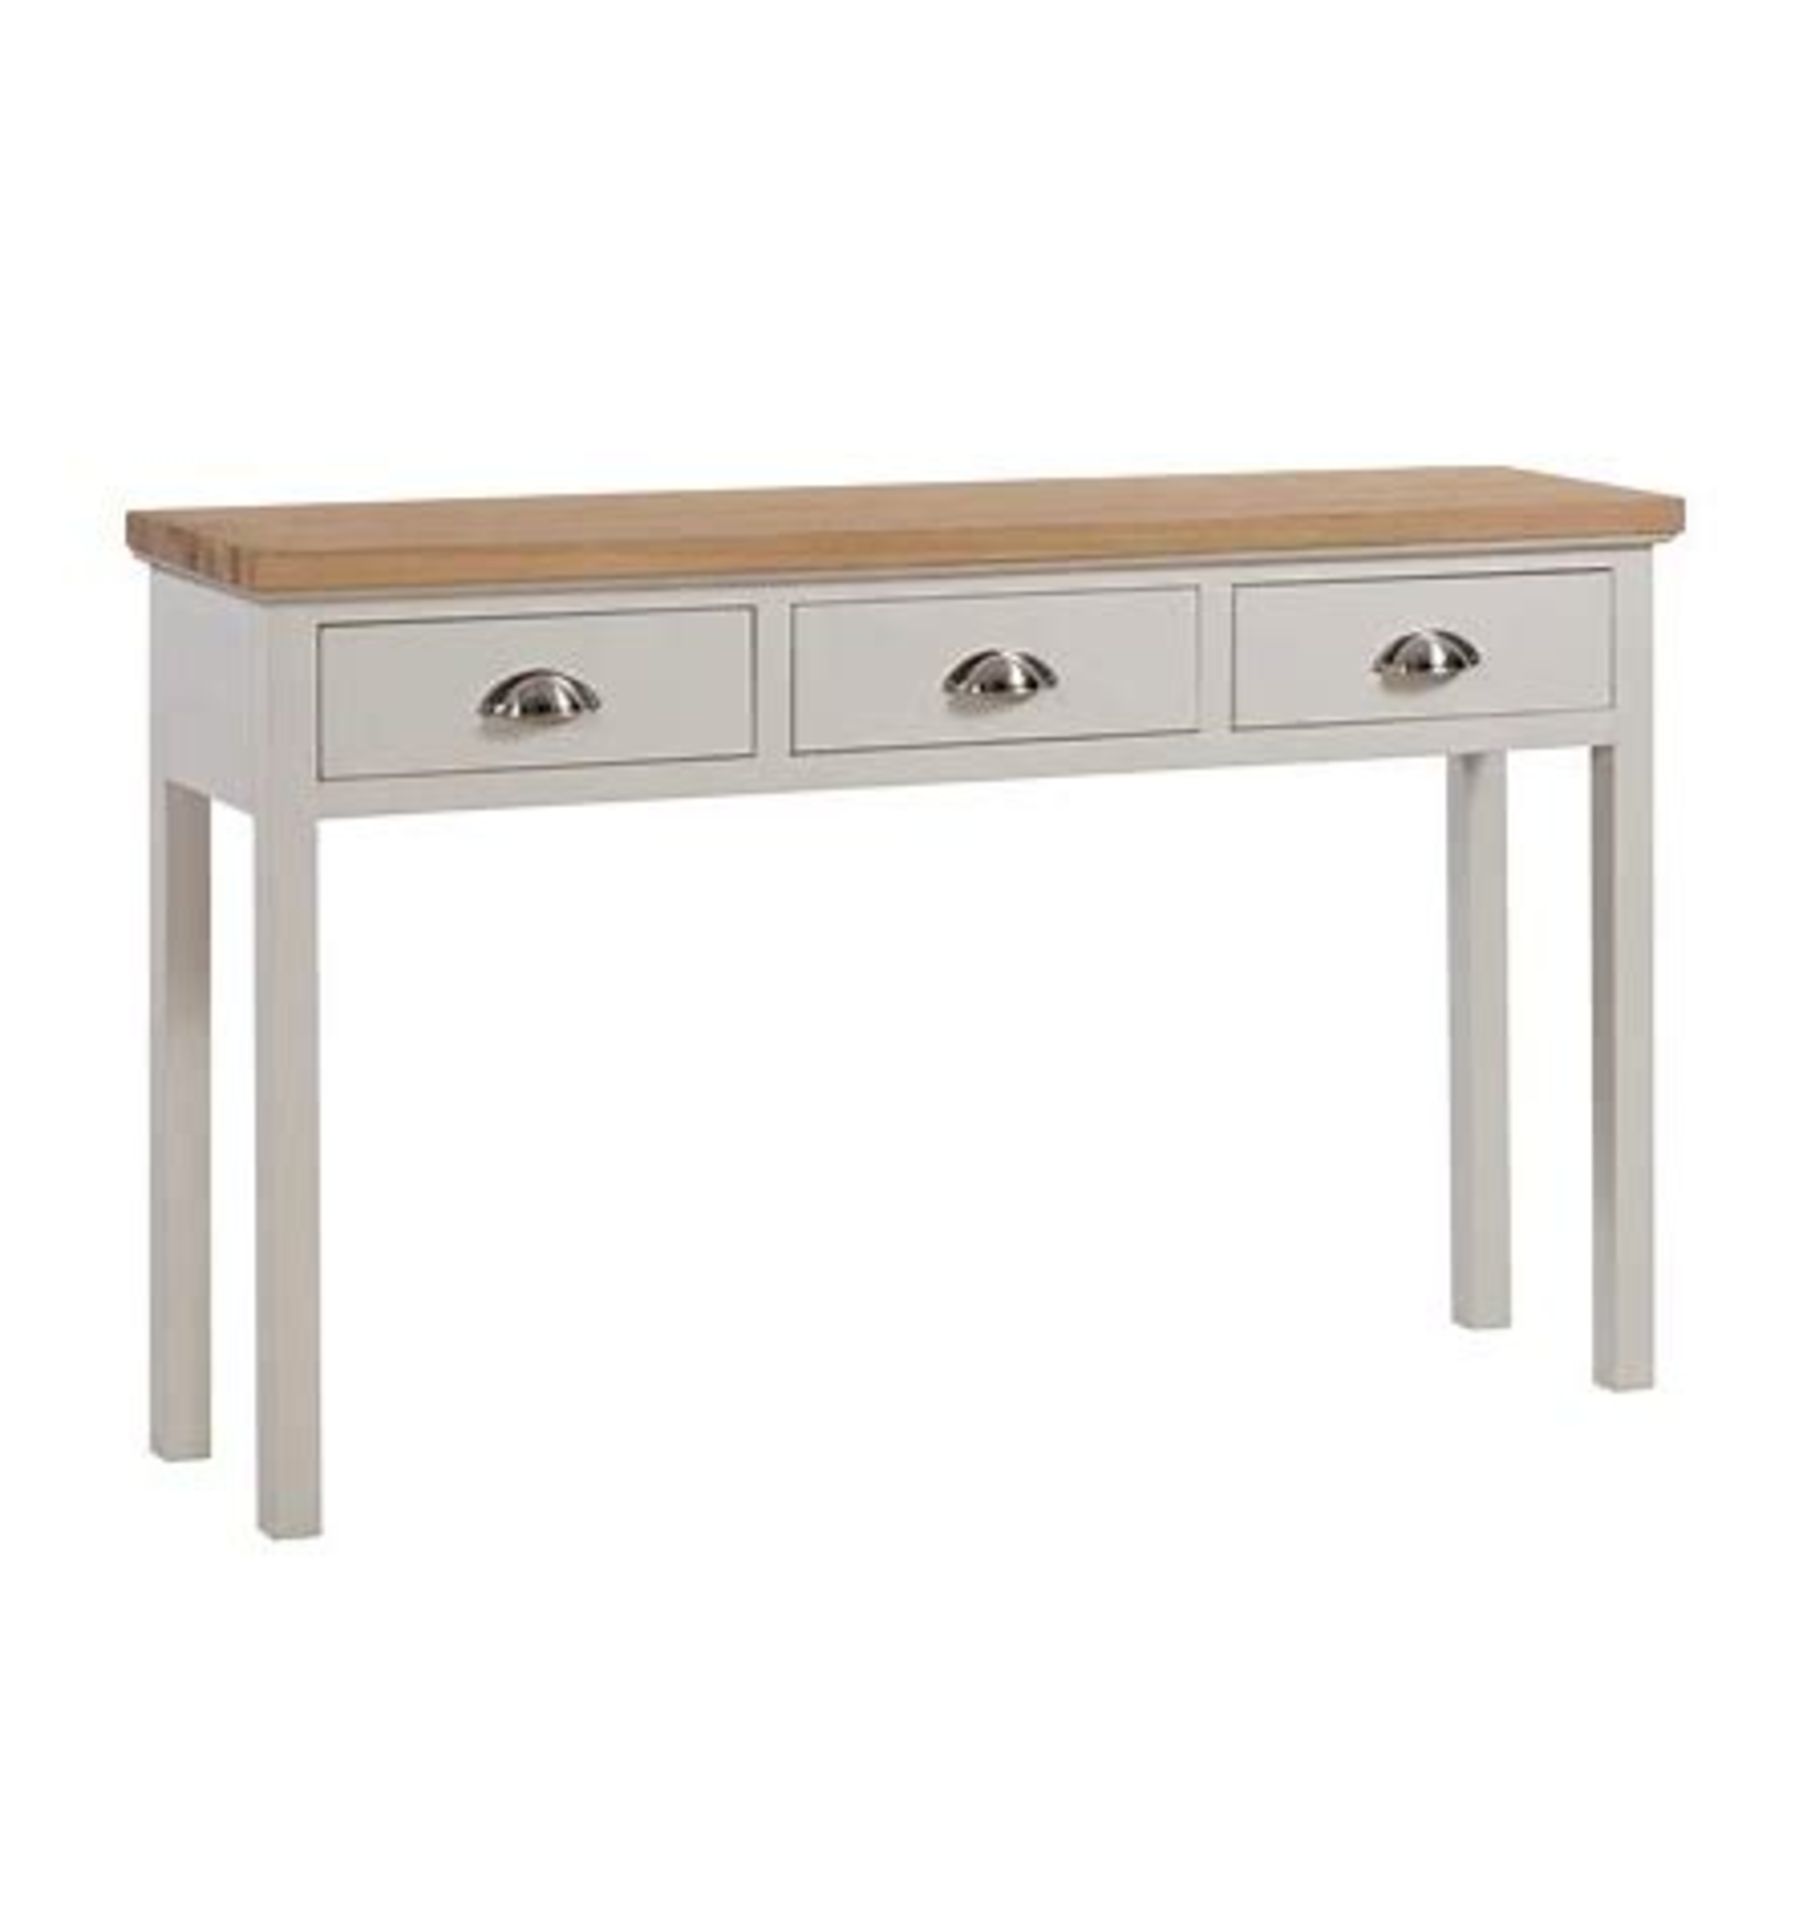 Wexford Three Drawer Console Table This Is Wexford Three Drawer Console Table, At 75cm High, 127cm - Image 2 of 2